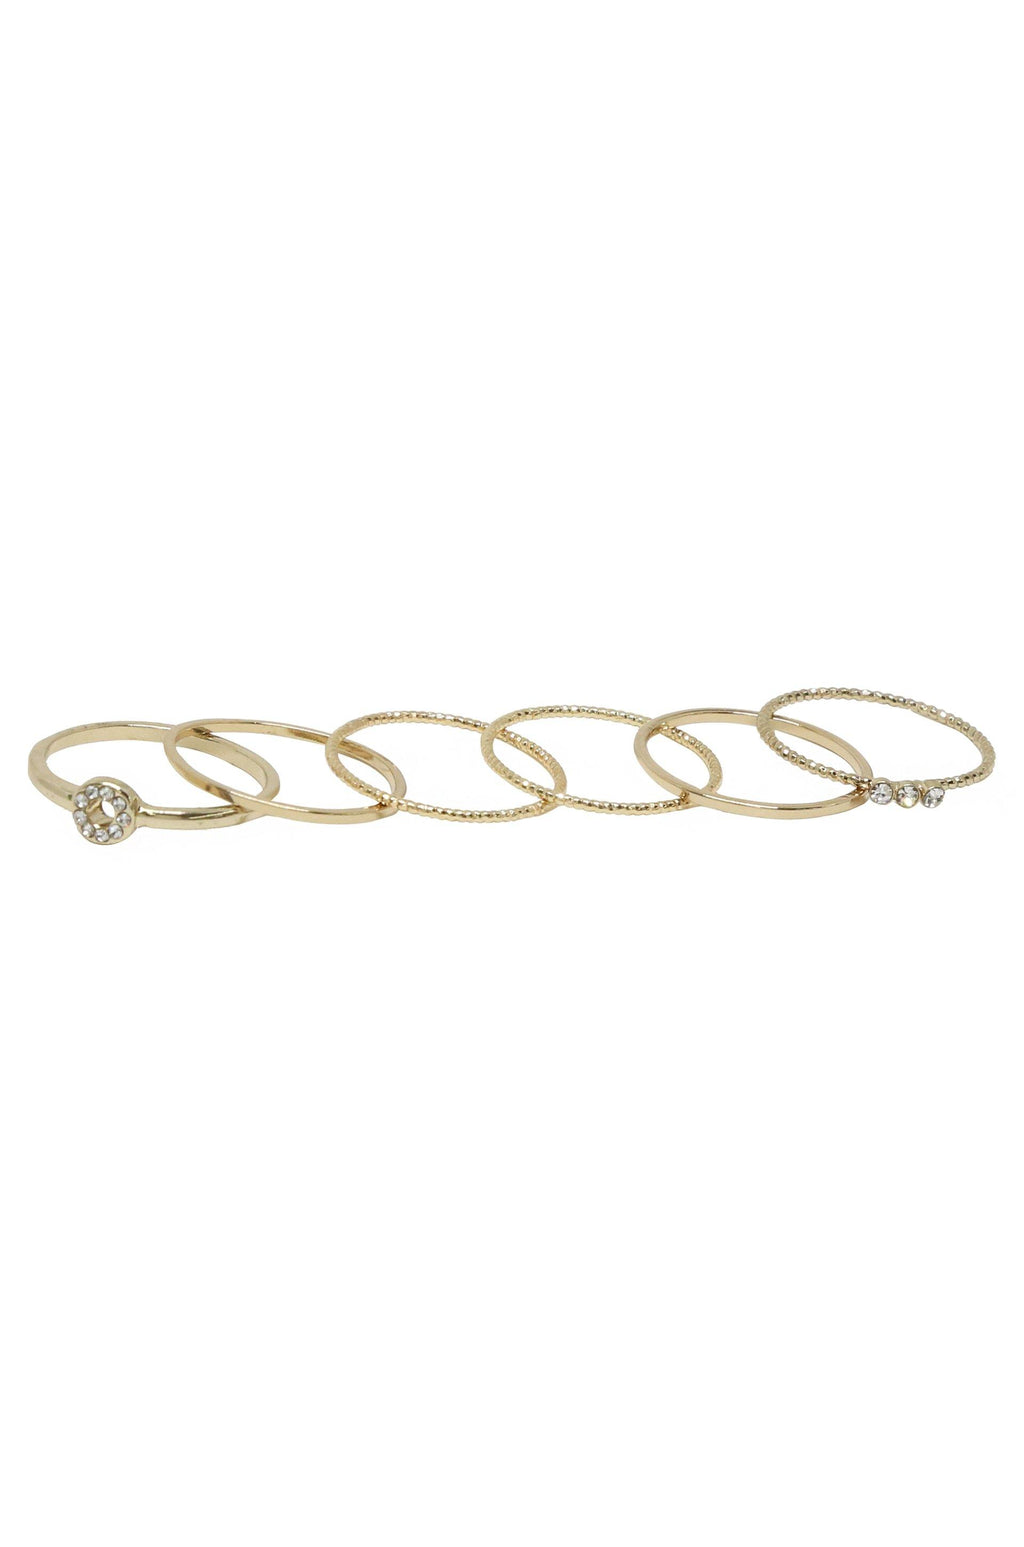 Dainty 18k Gold Plated Stacking Ring Set of 6 - The Gallant Way